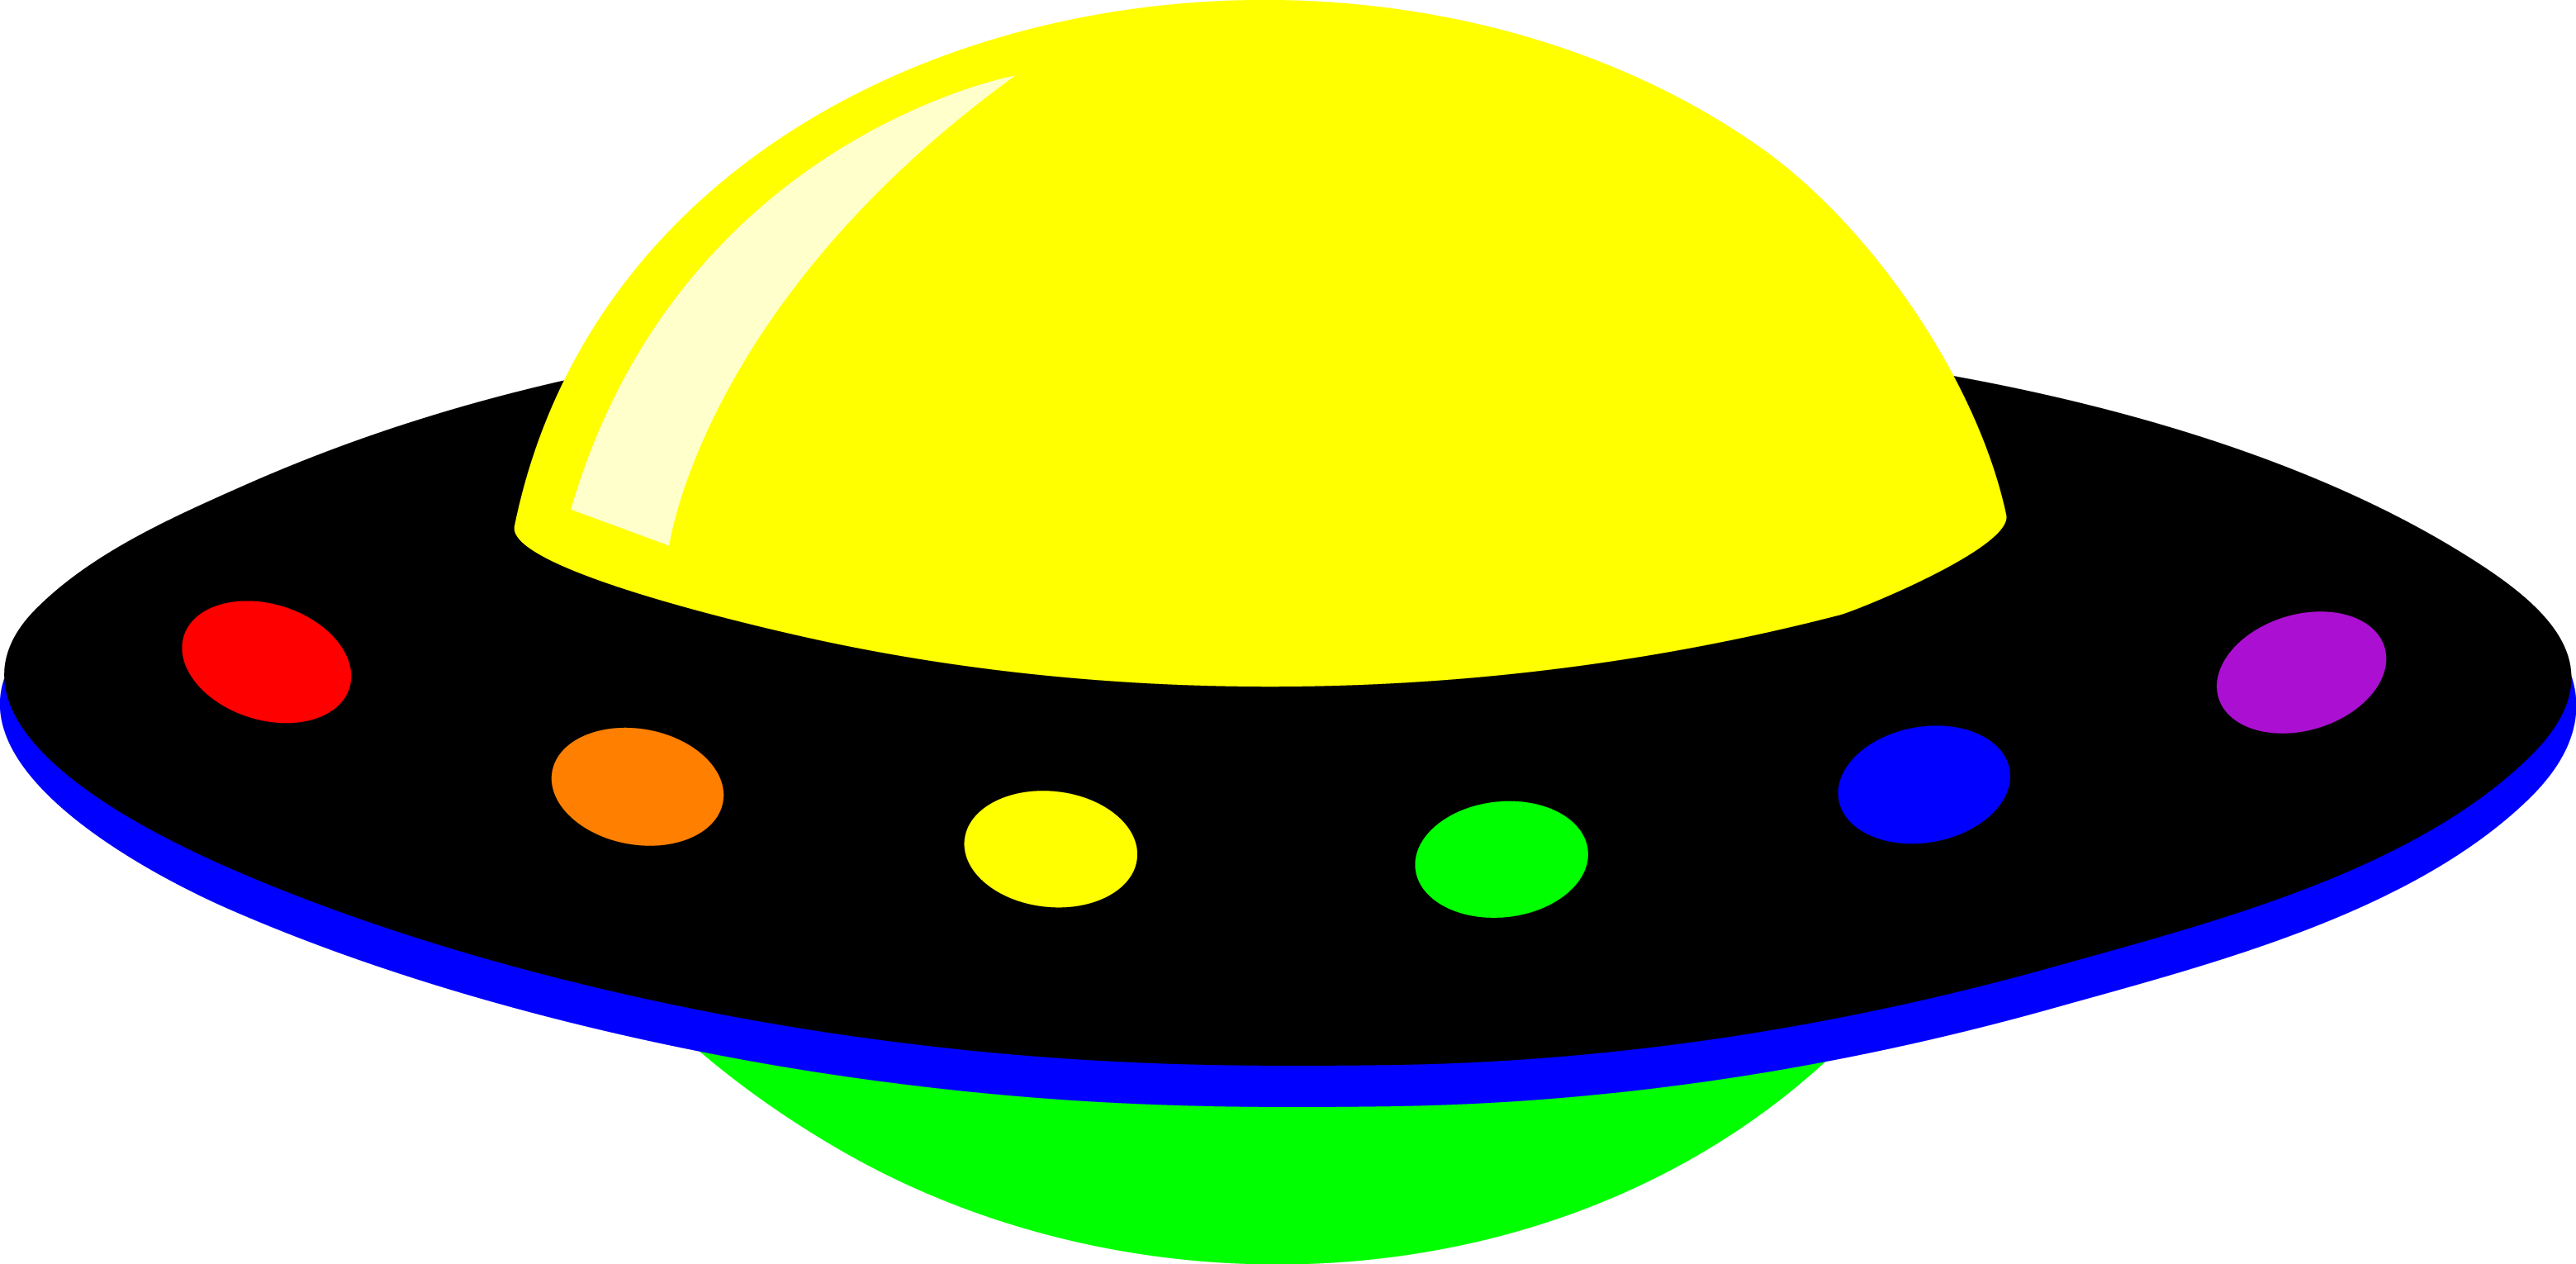 space clipart free - photo #19